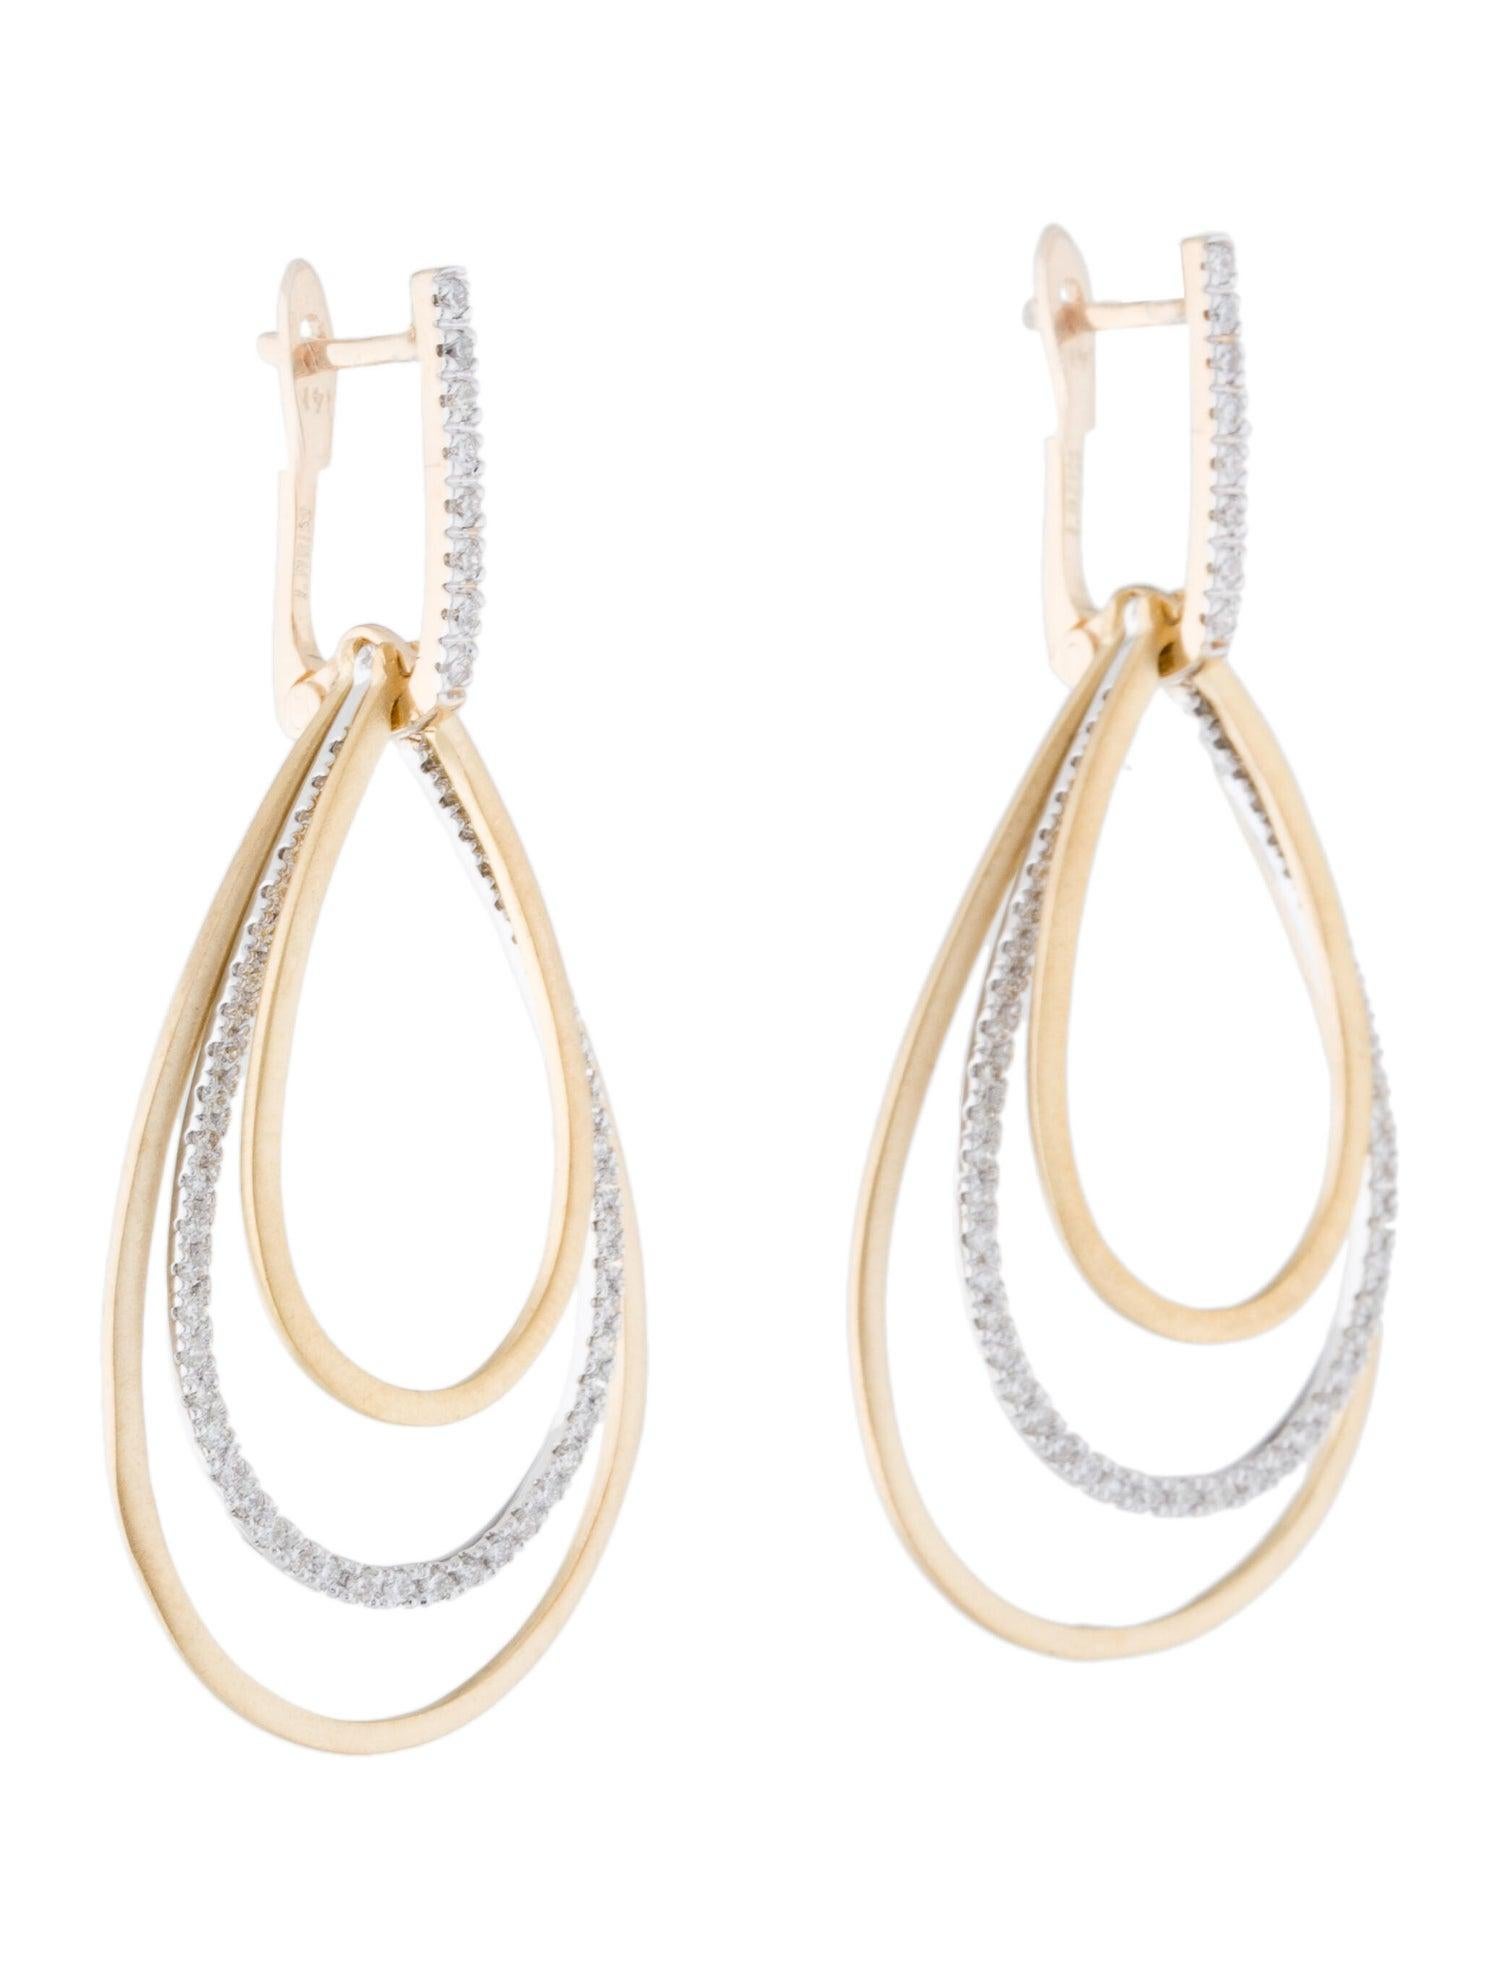 14 Karat Yellow Gold Hand-Crafted Satin-Finished Cascading Tear Drop Earrings, Accented with 0.66 Carats of Pave Set Diamonds on a Leverback Backfinding.
